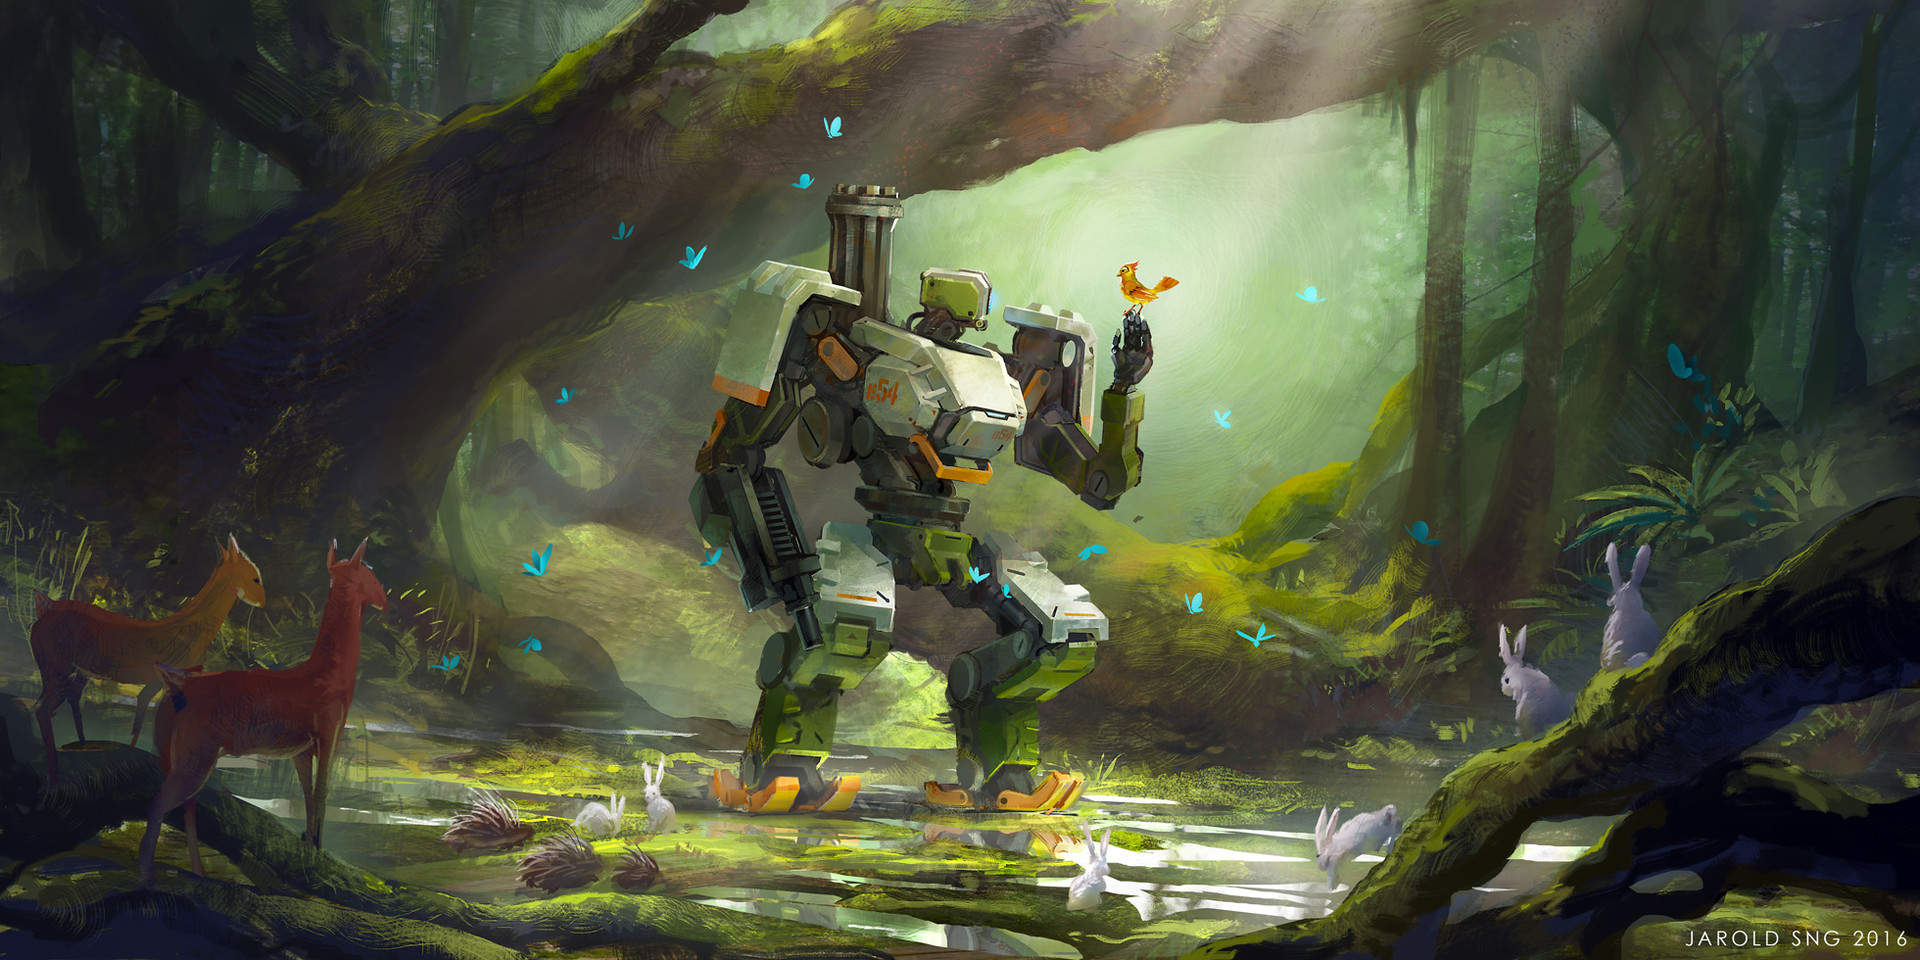 Overwatch Bastion Wallpapers